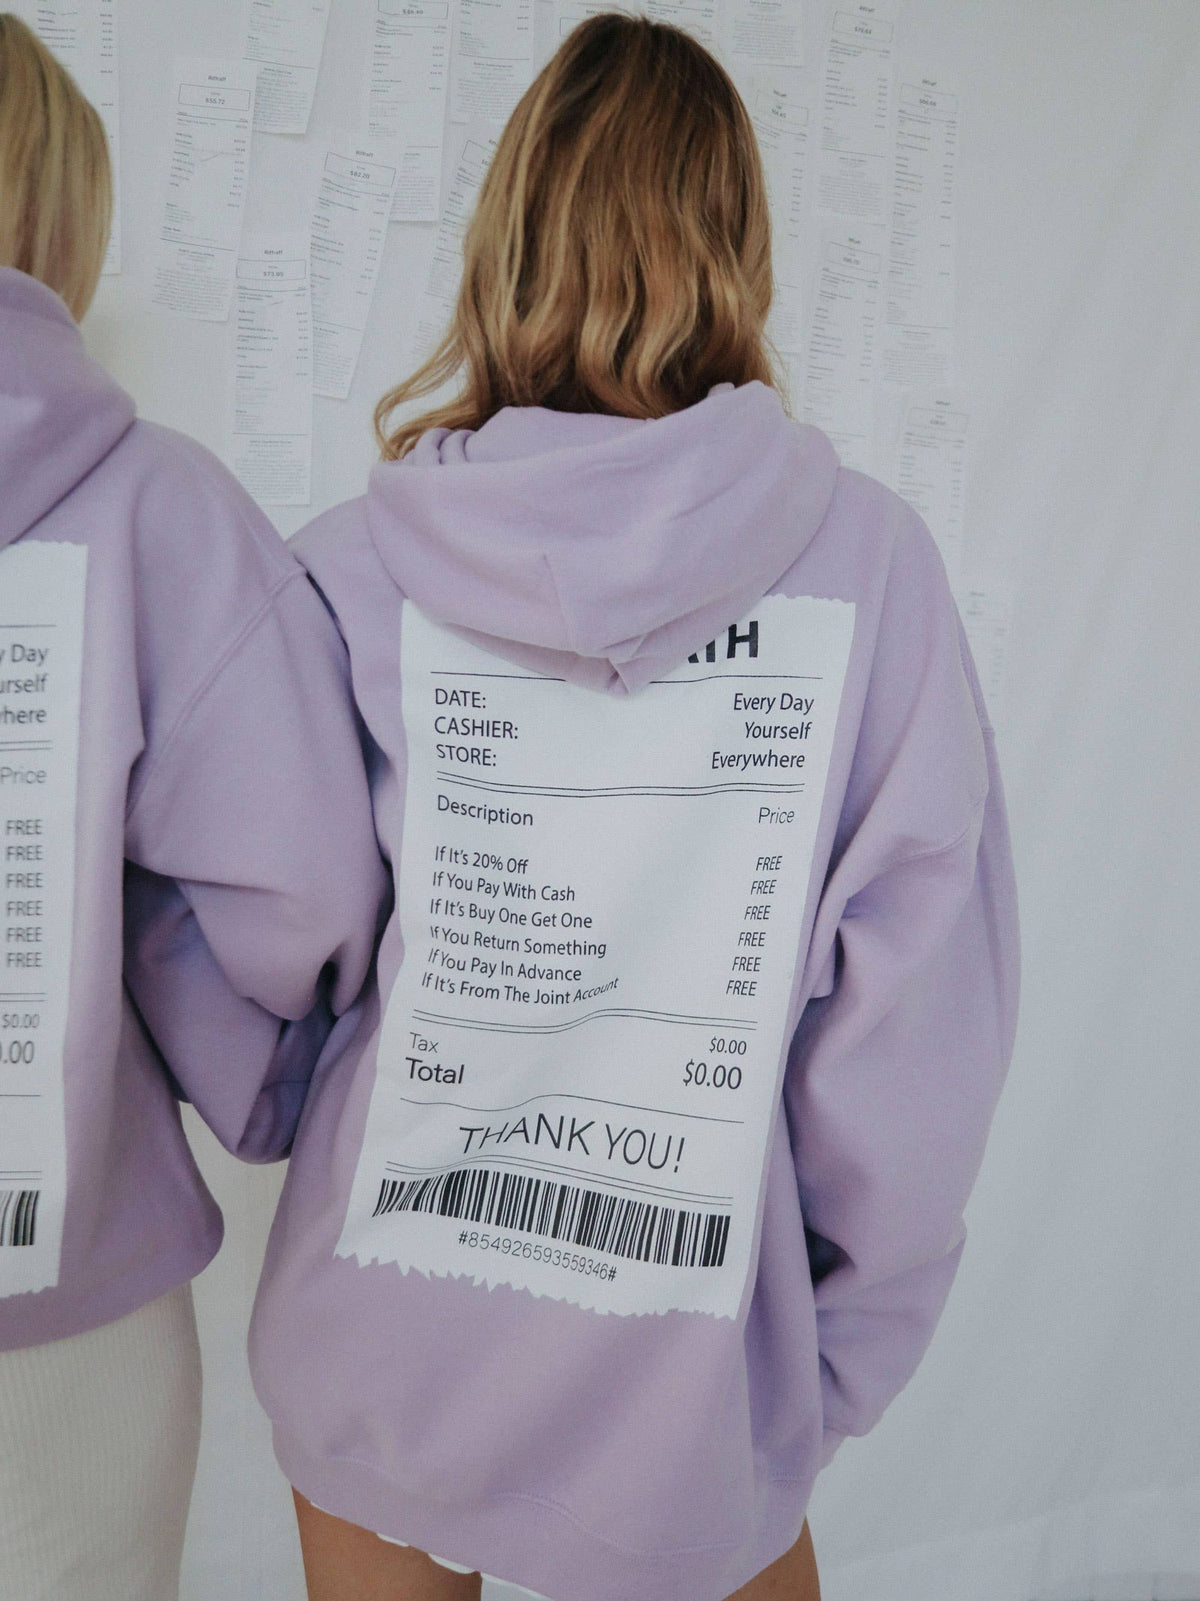 Girl Math Hoodie (FRONT + BACK)